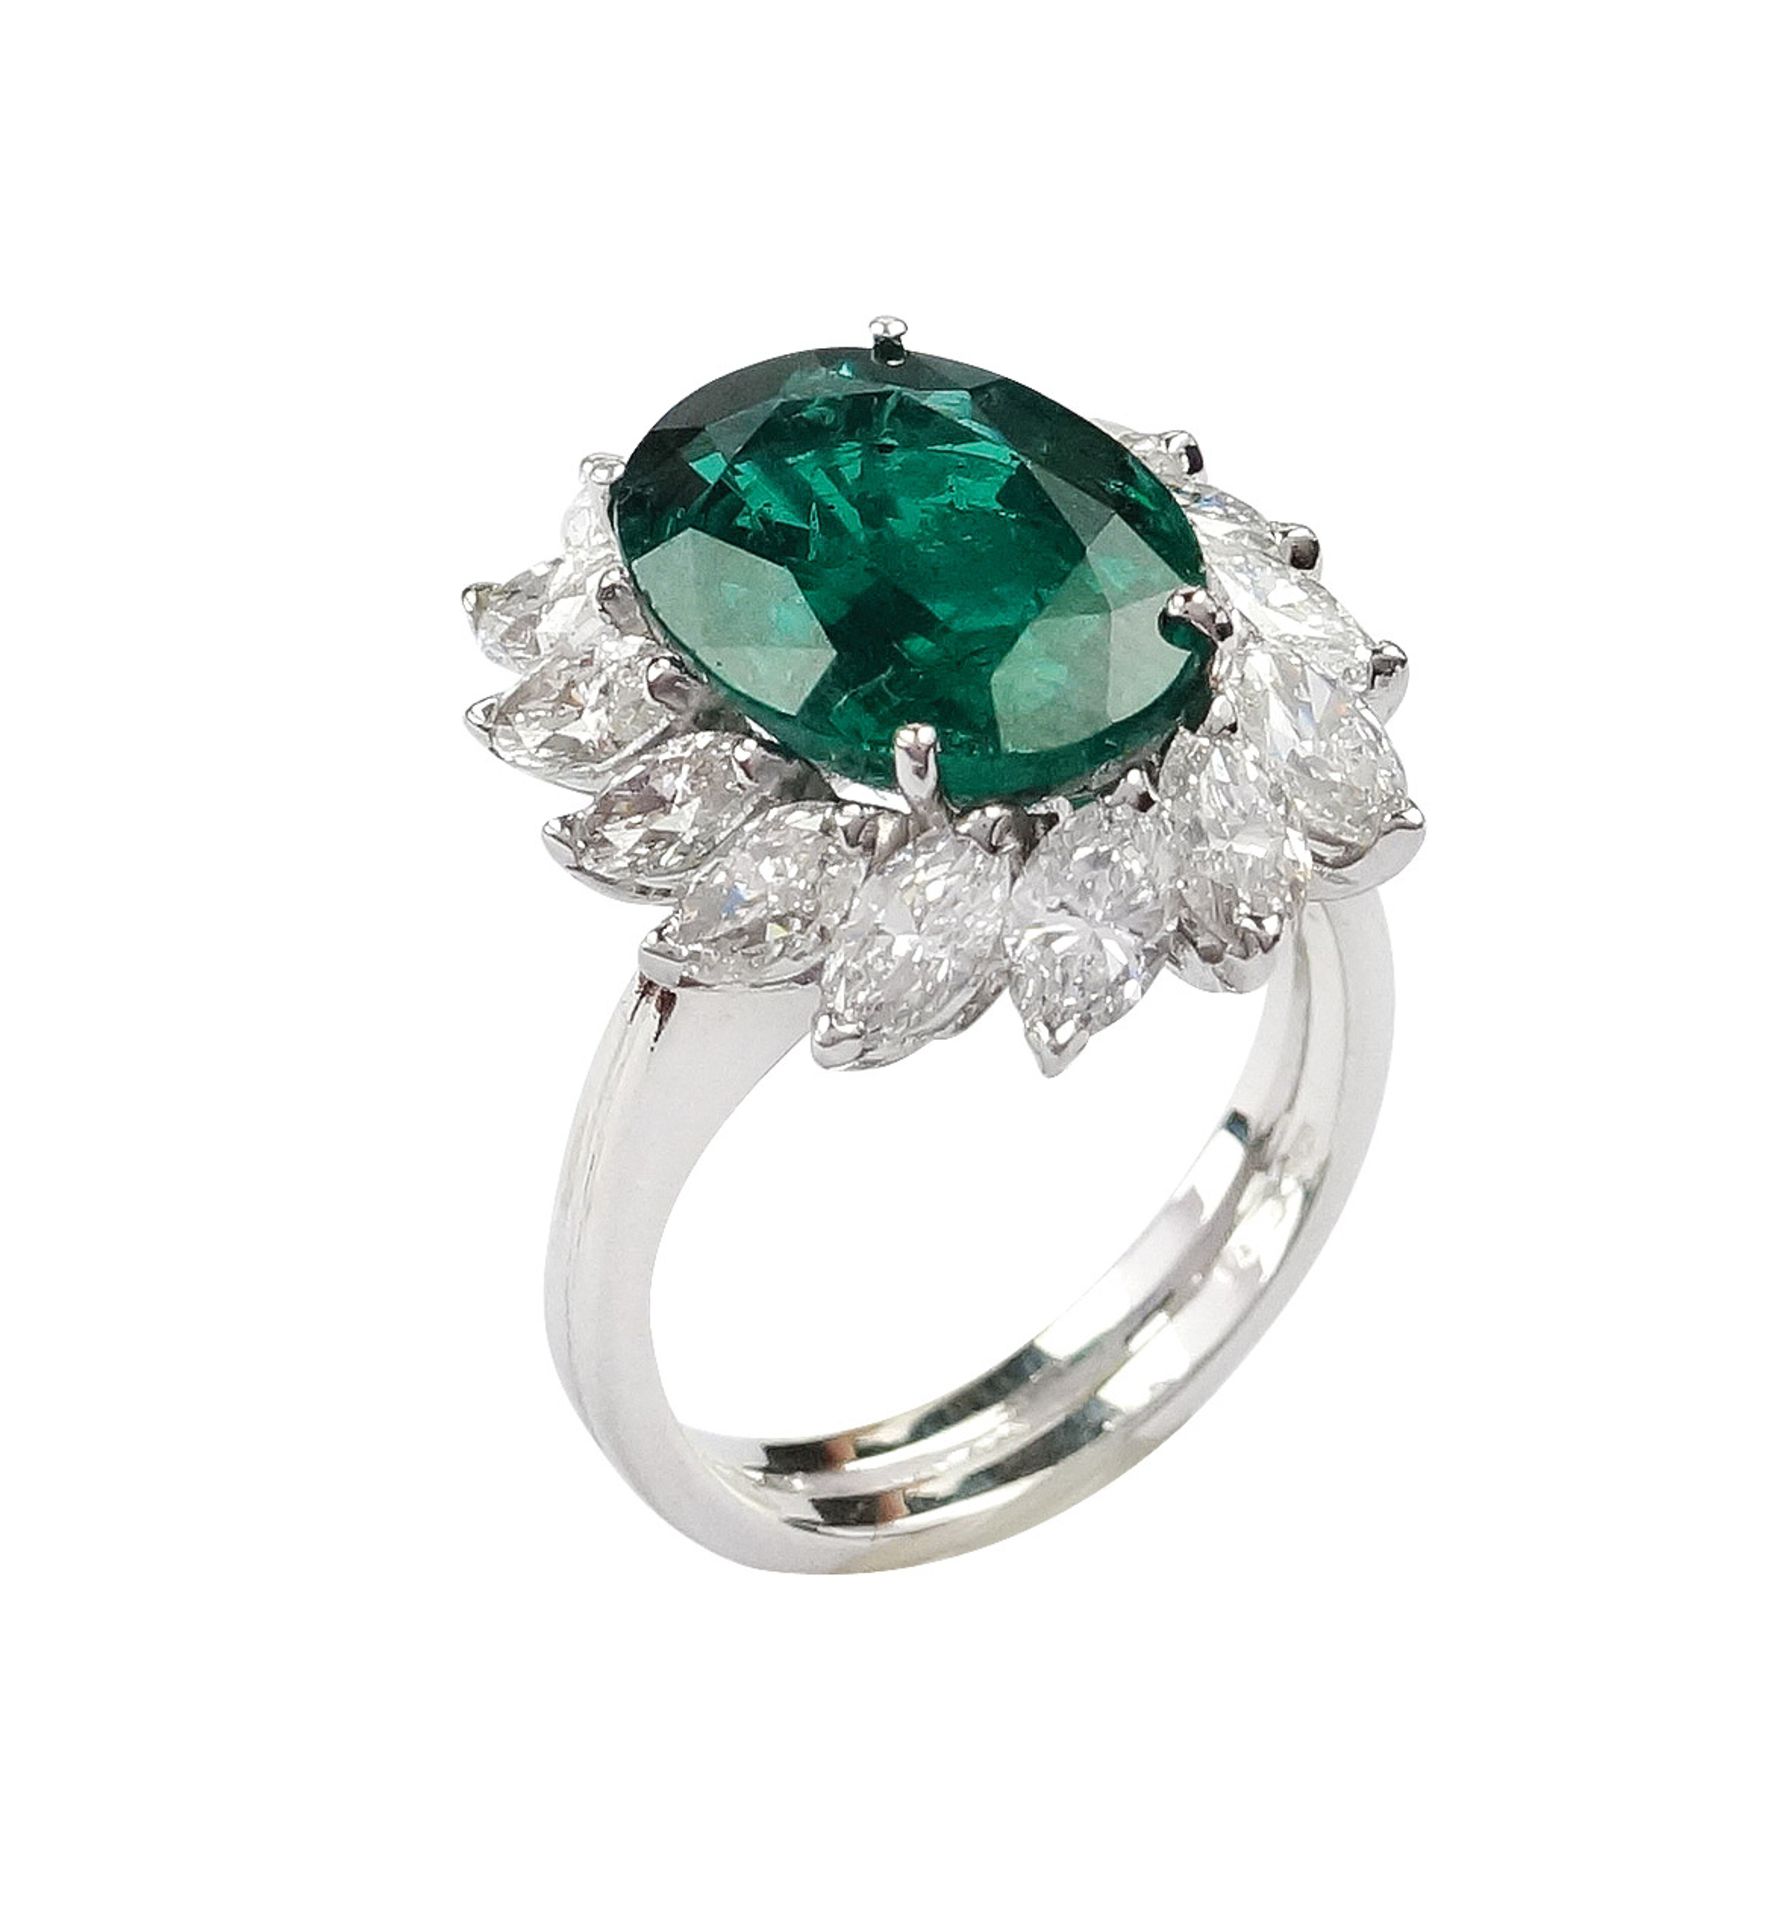 An 18k white gold and natural emerald ring